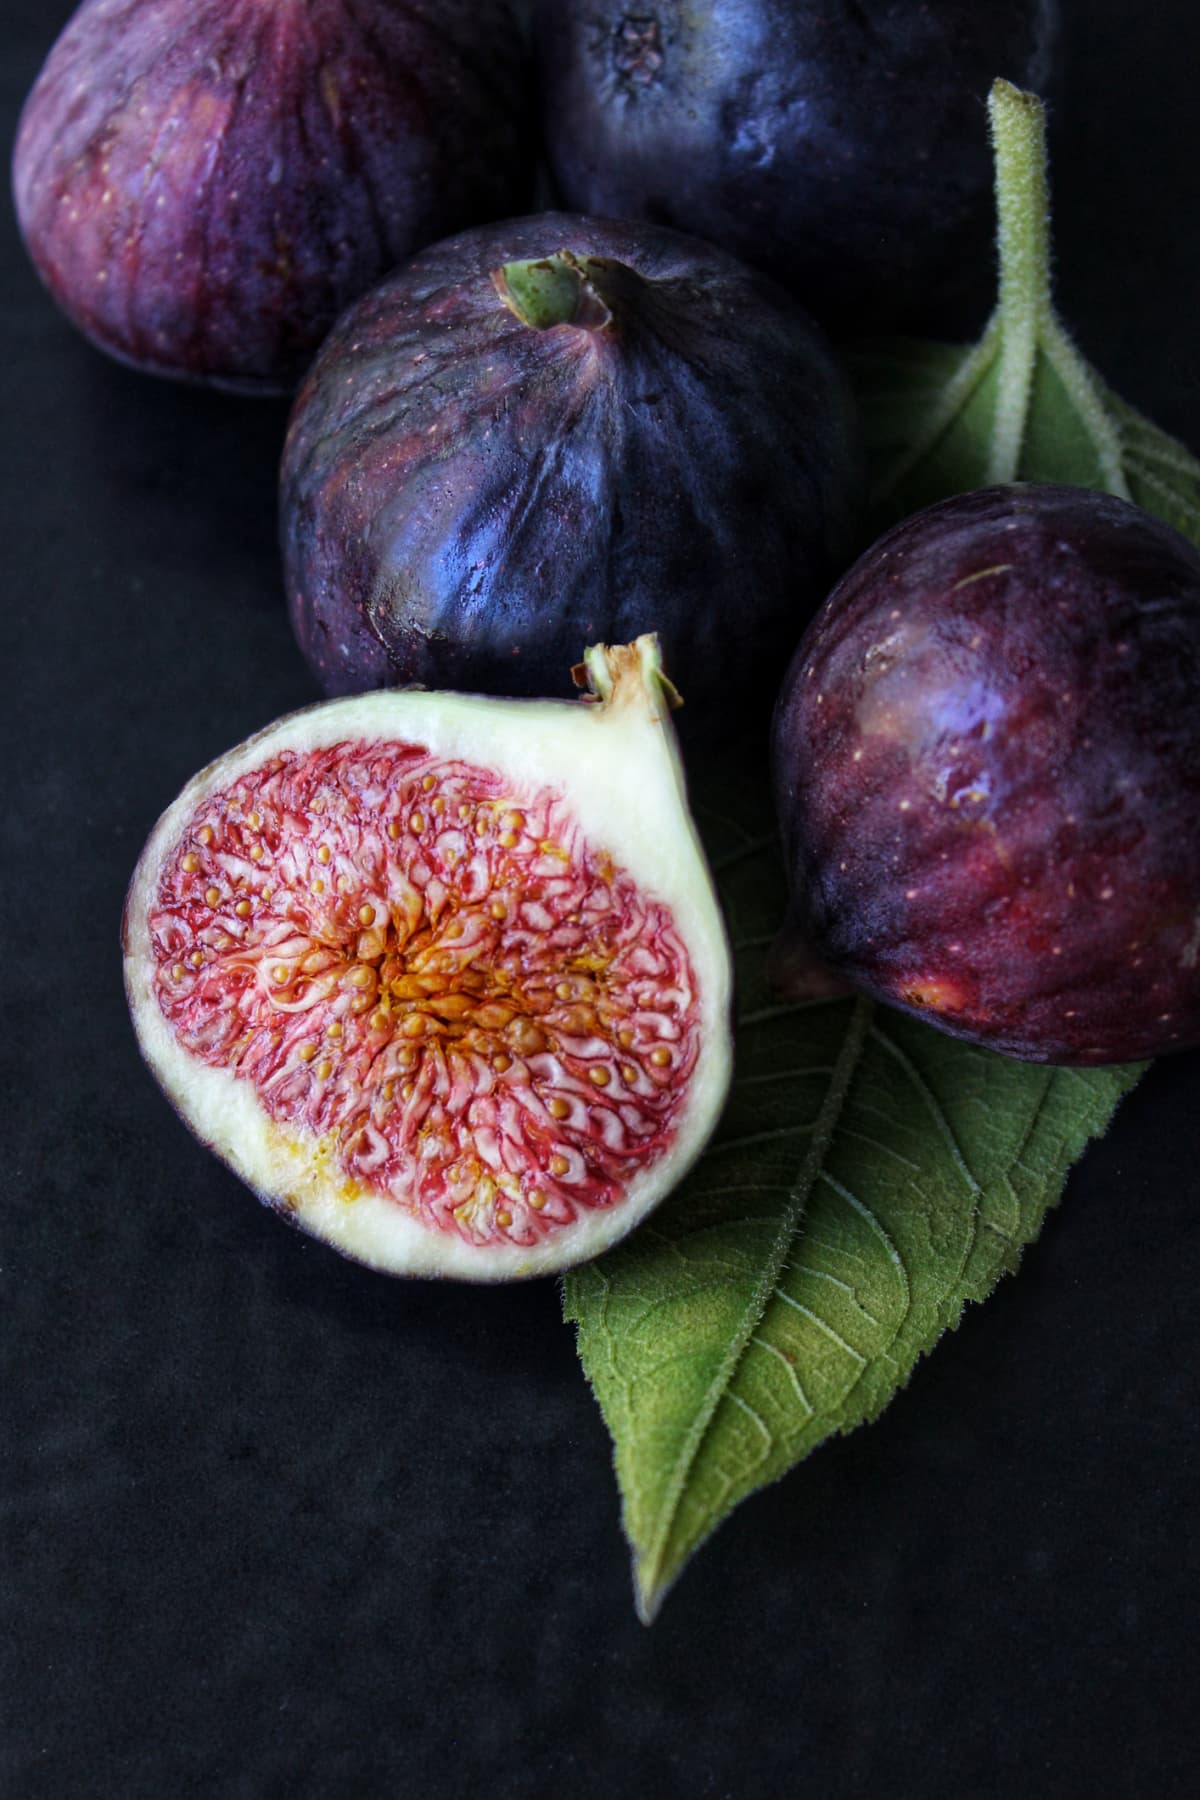 A fig cut in half surrounded by other figs